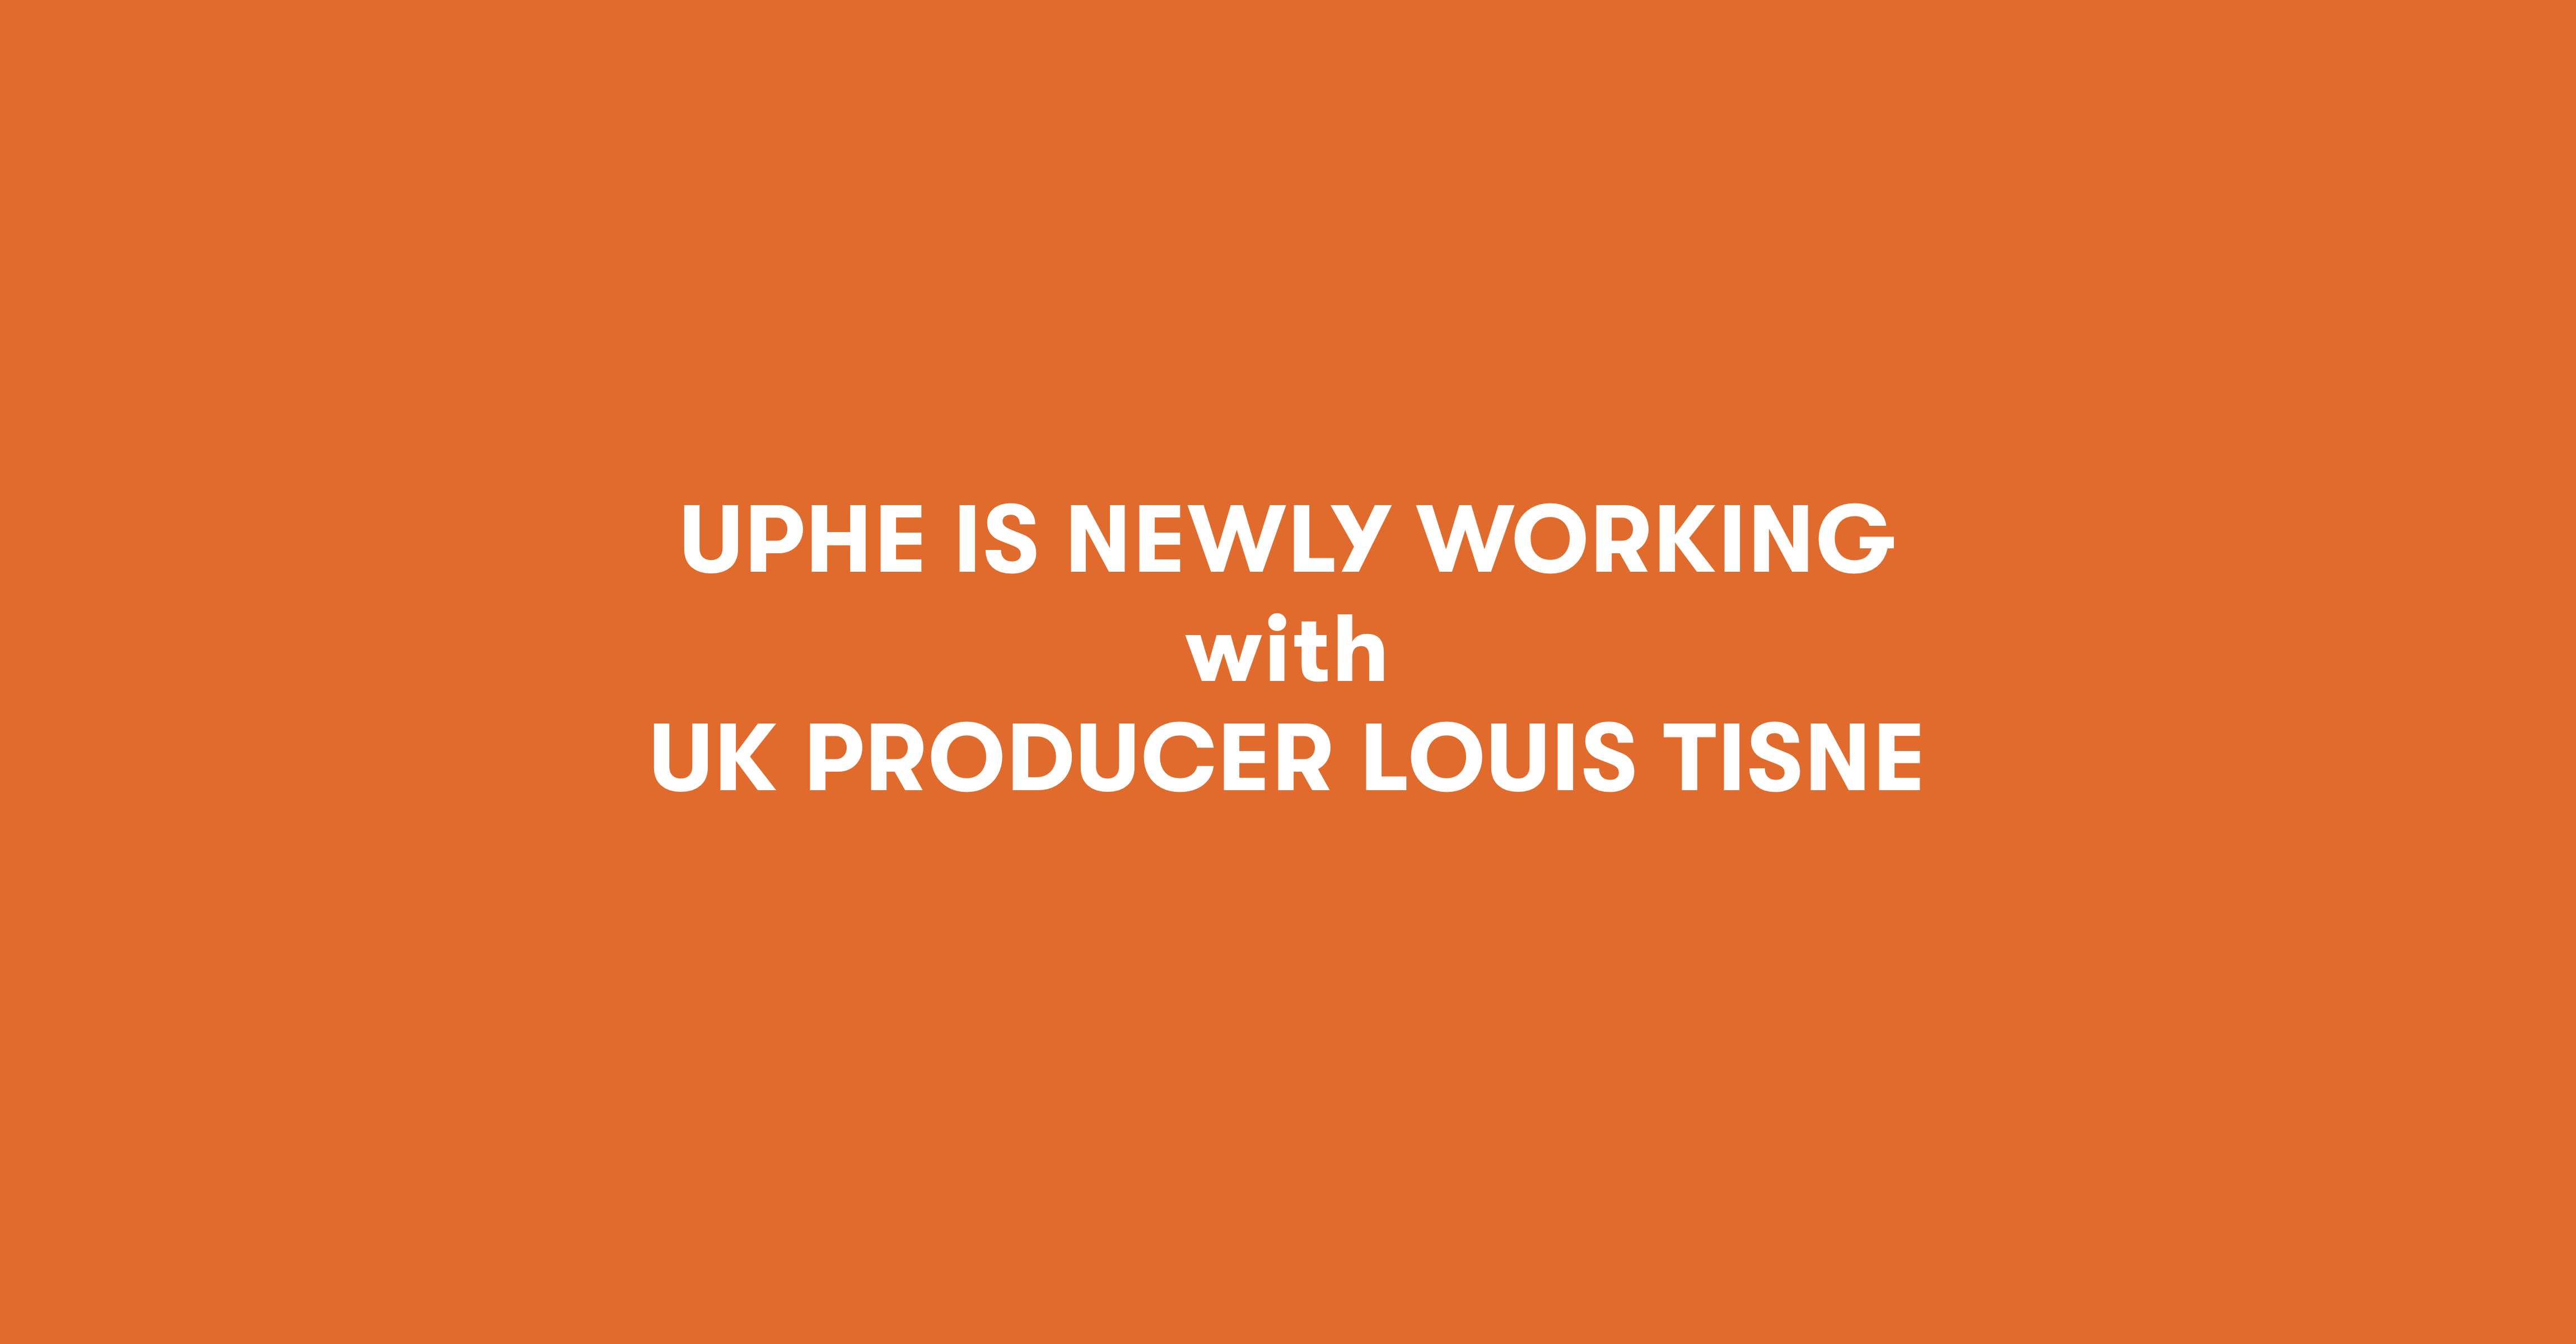 Uphe is newly working with UK Producer Louis Tisnè